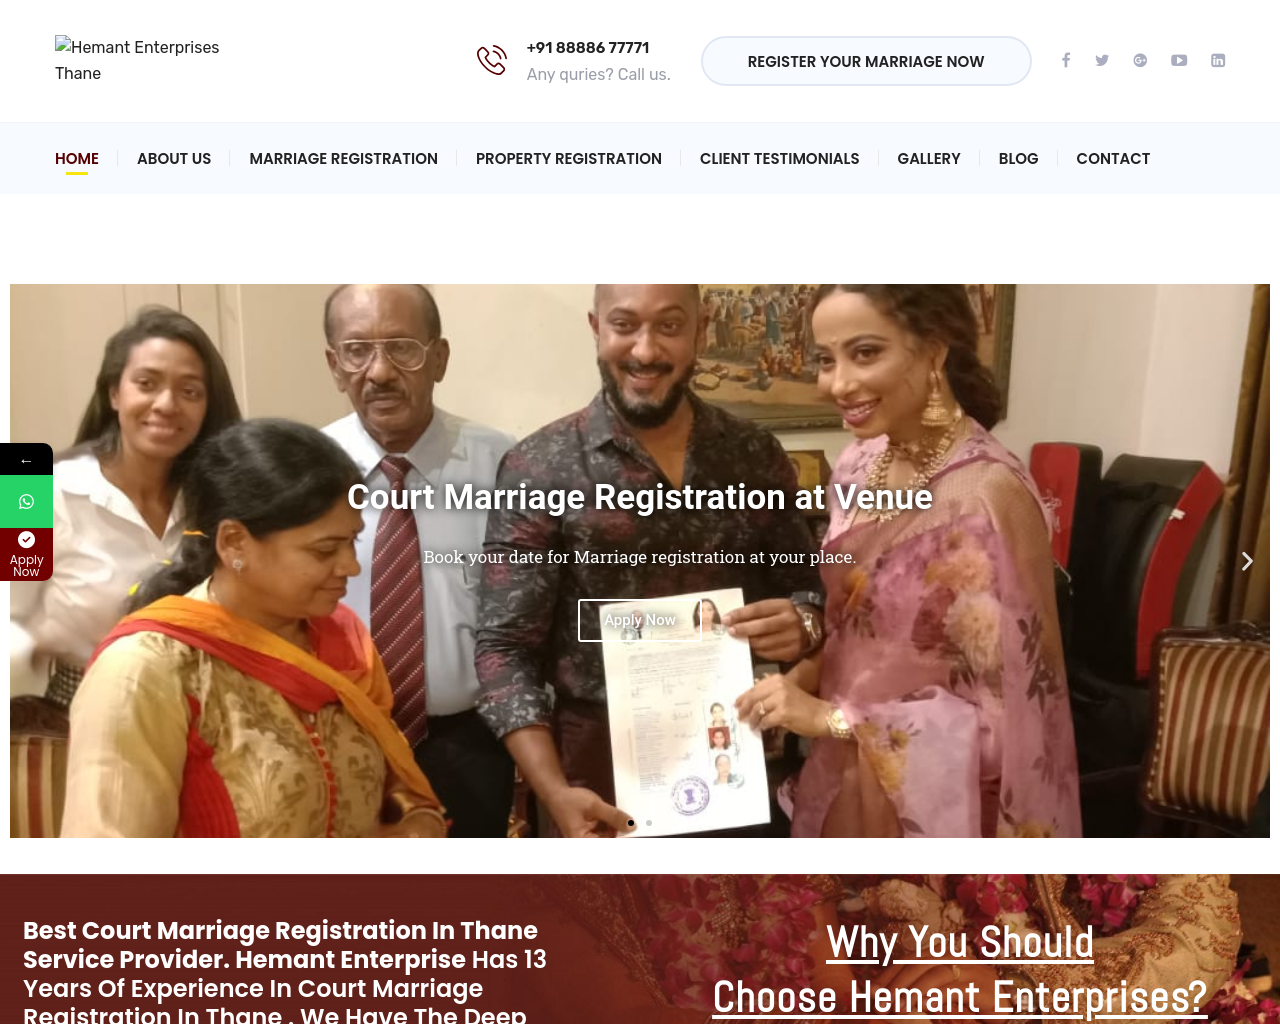 courtmarriageregistration.co.in